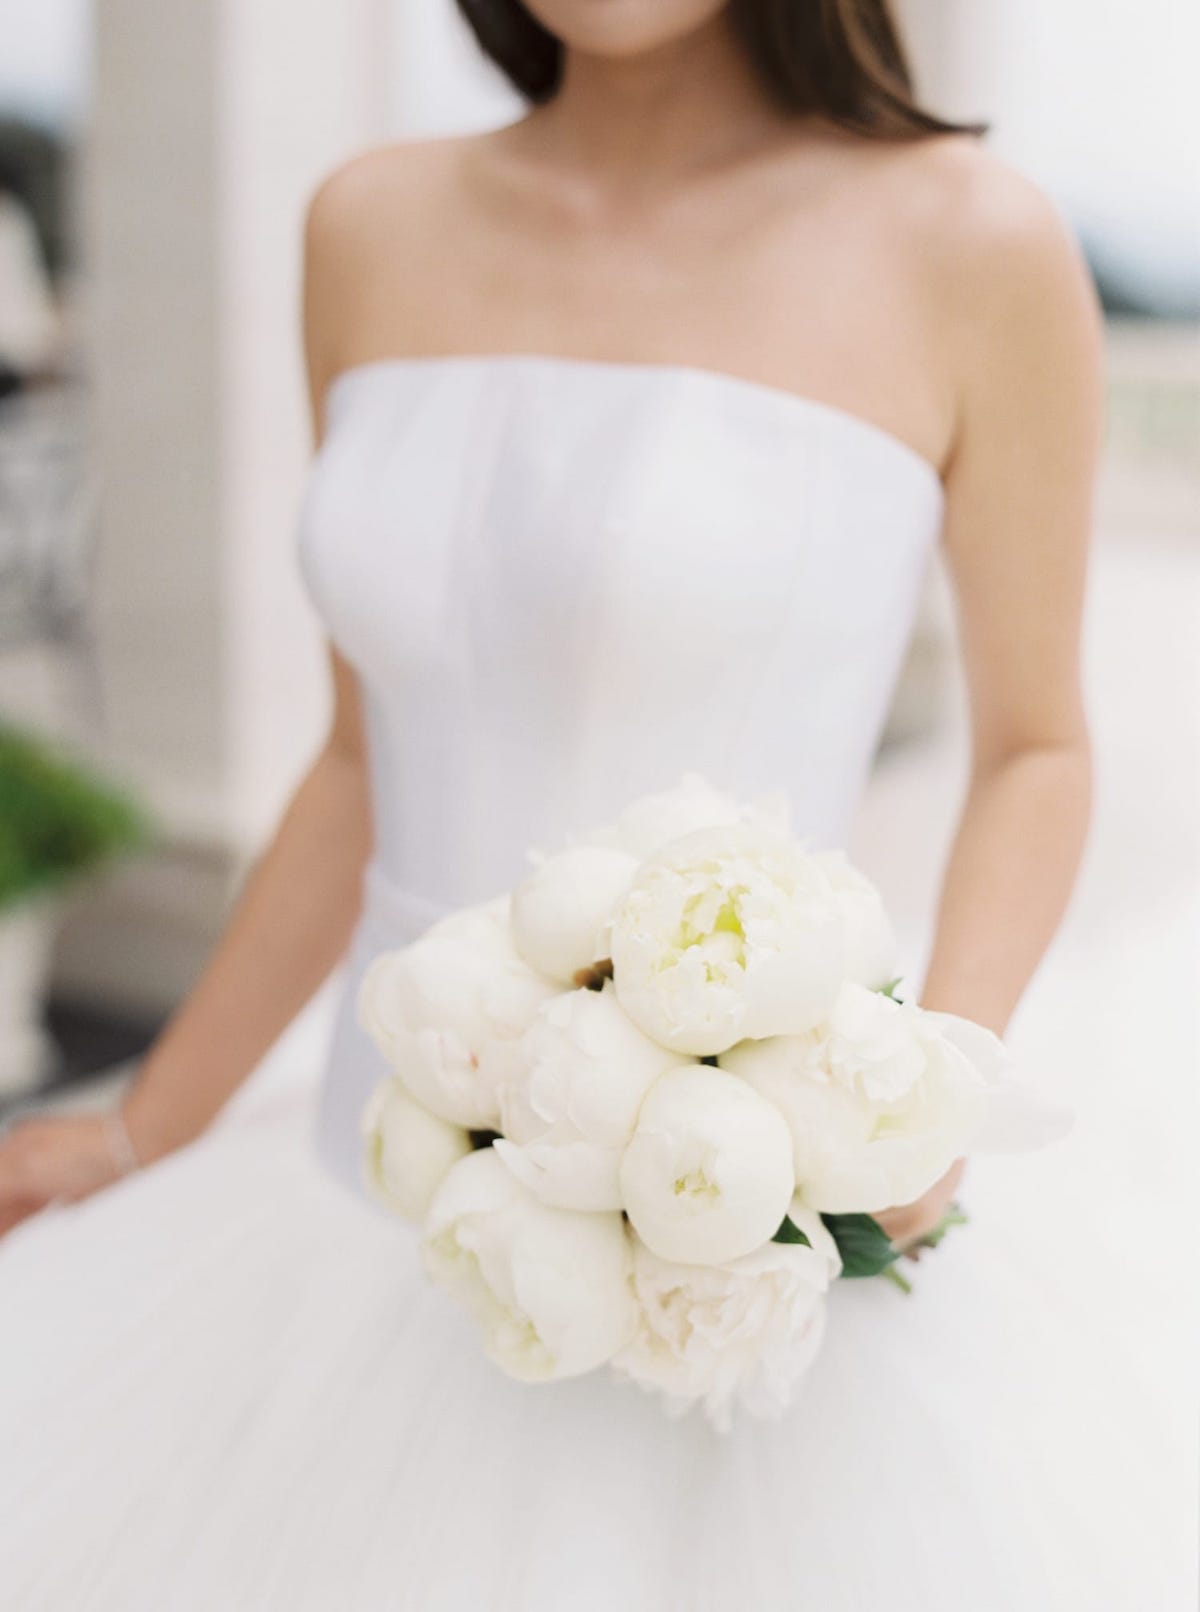 Spring bridal bouquets with all-white peonies